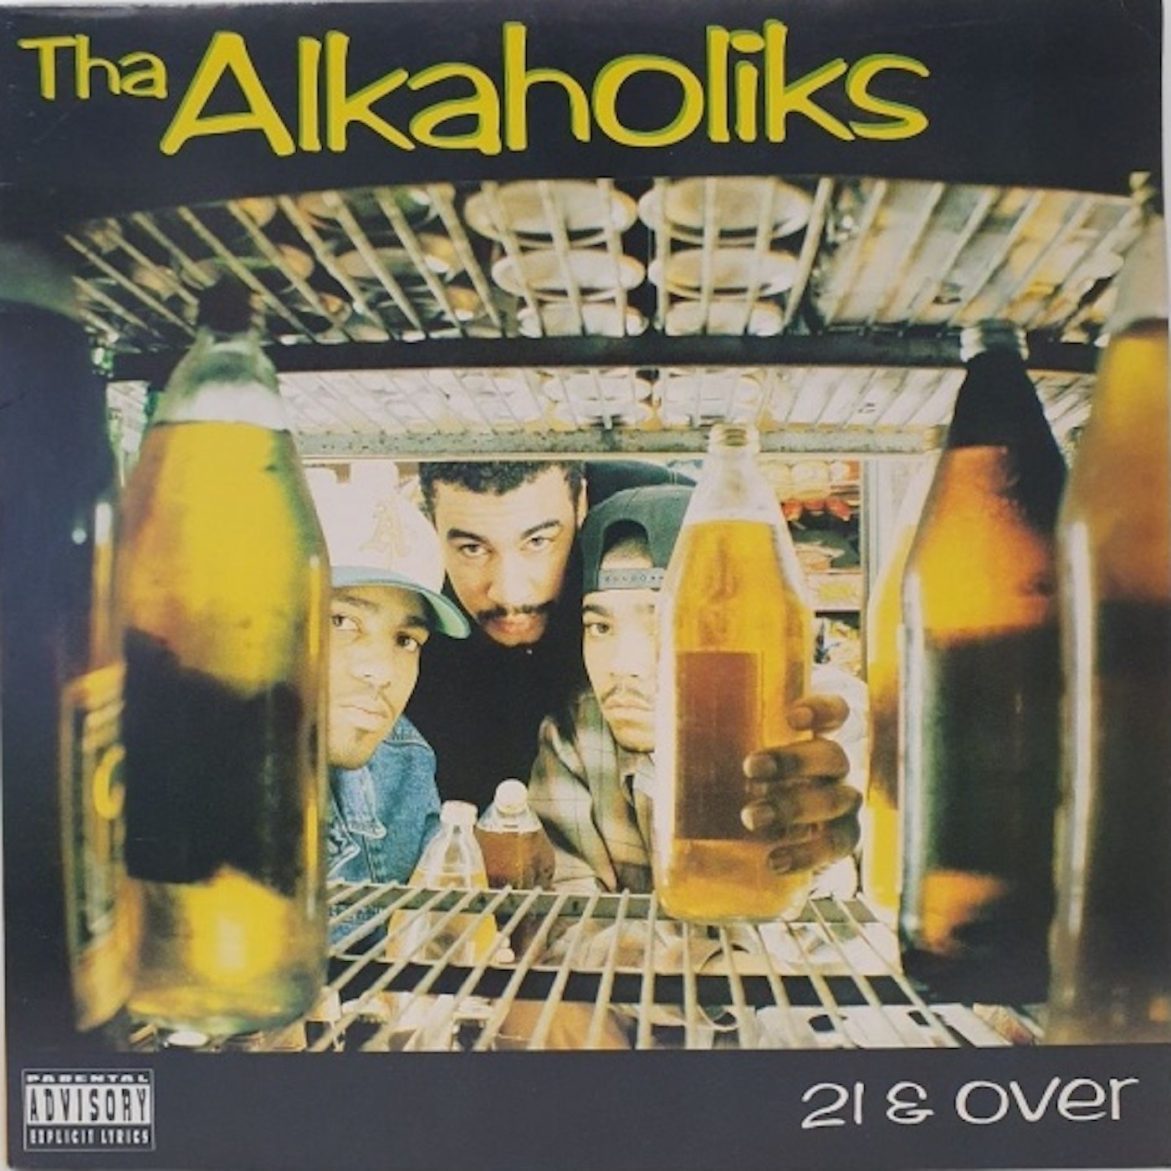 Black Podcasting - Tha Alkaholiks: 21 & Over (1993). "Likwit" Hip-Hop from L.A.